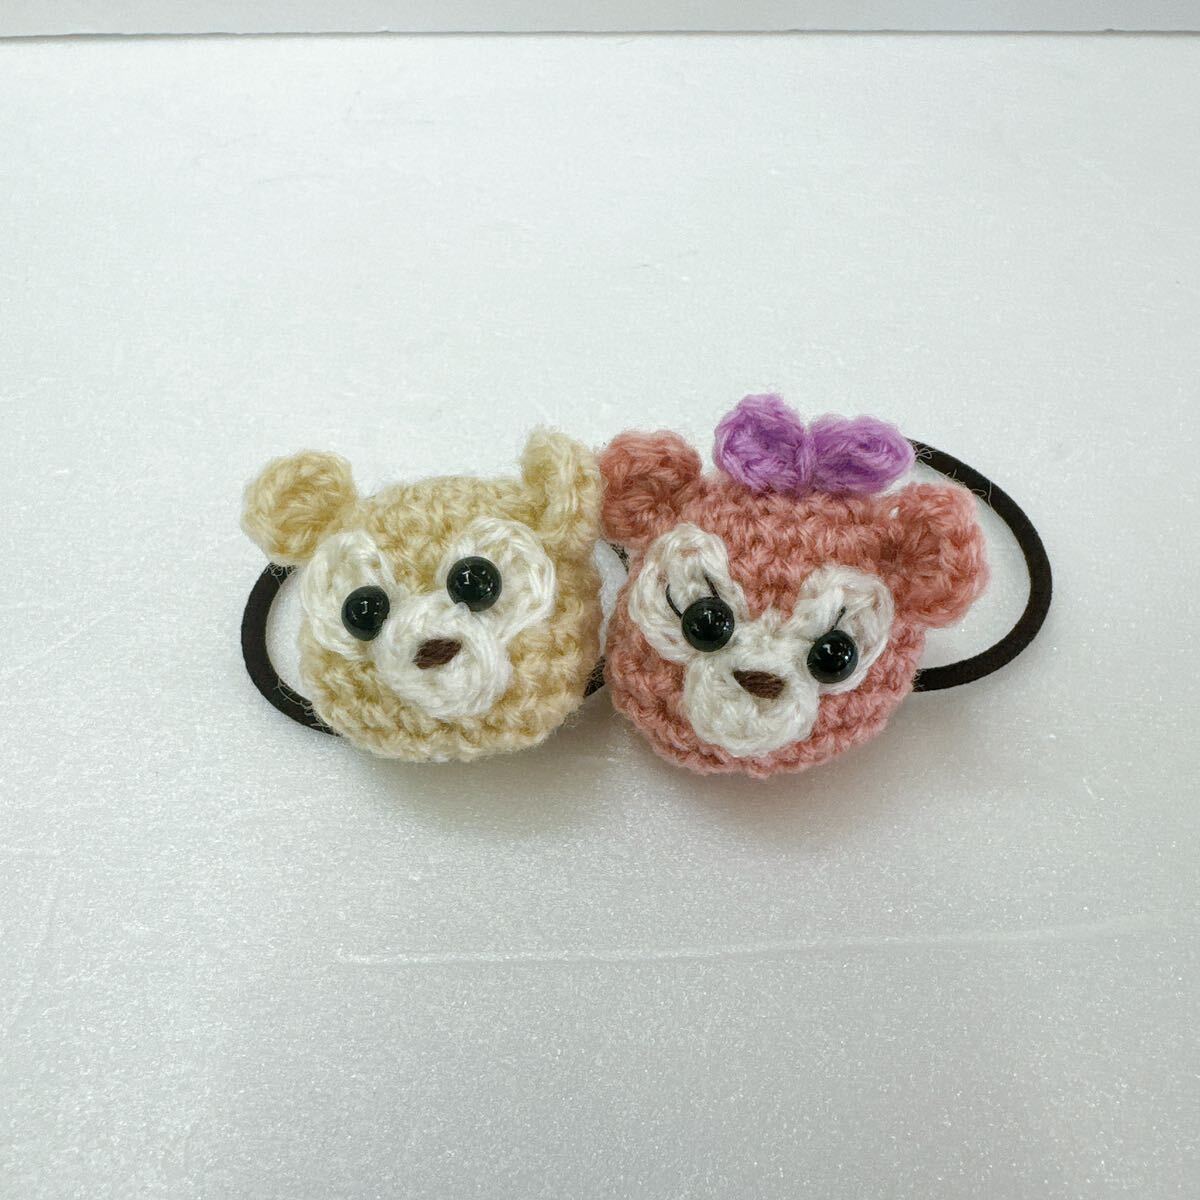  hand made hair elastic 2 piece set Duffy manner Shellie May manner face ver*